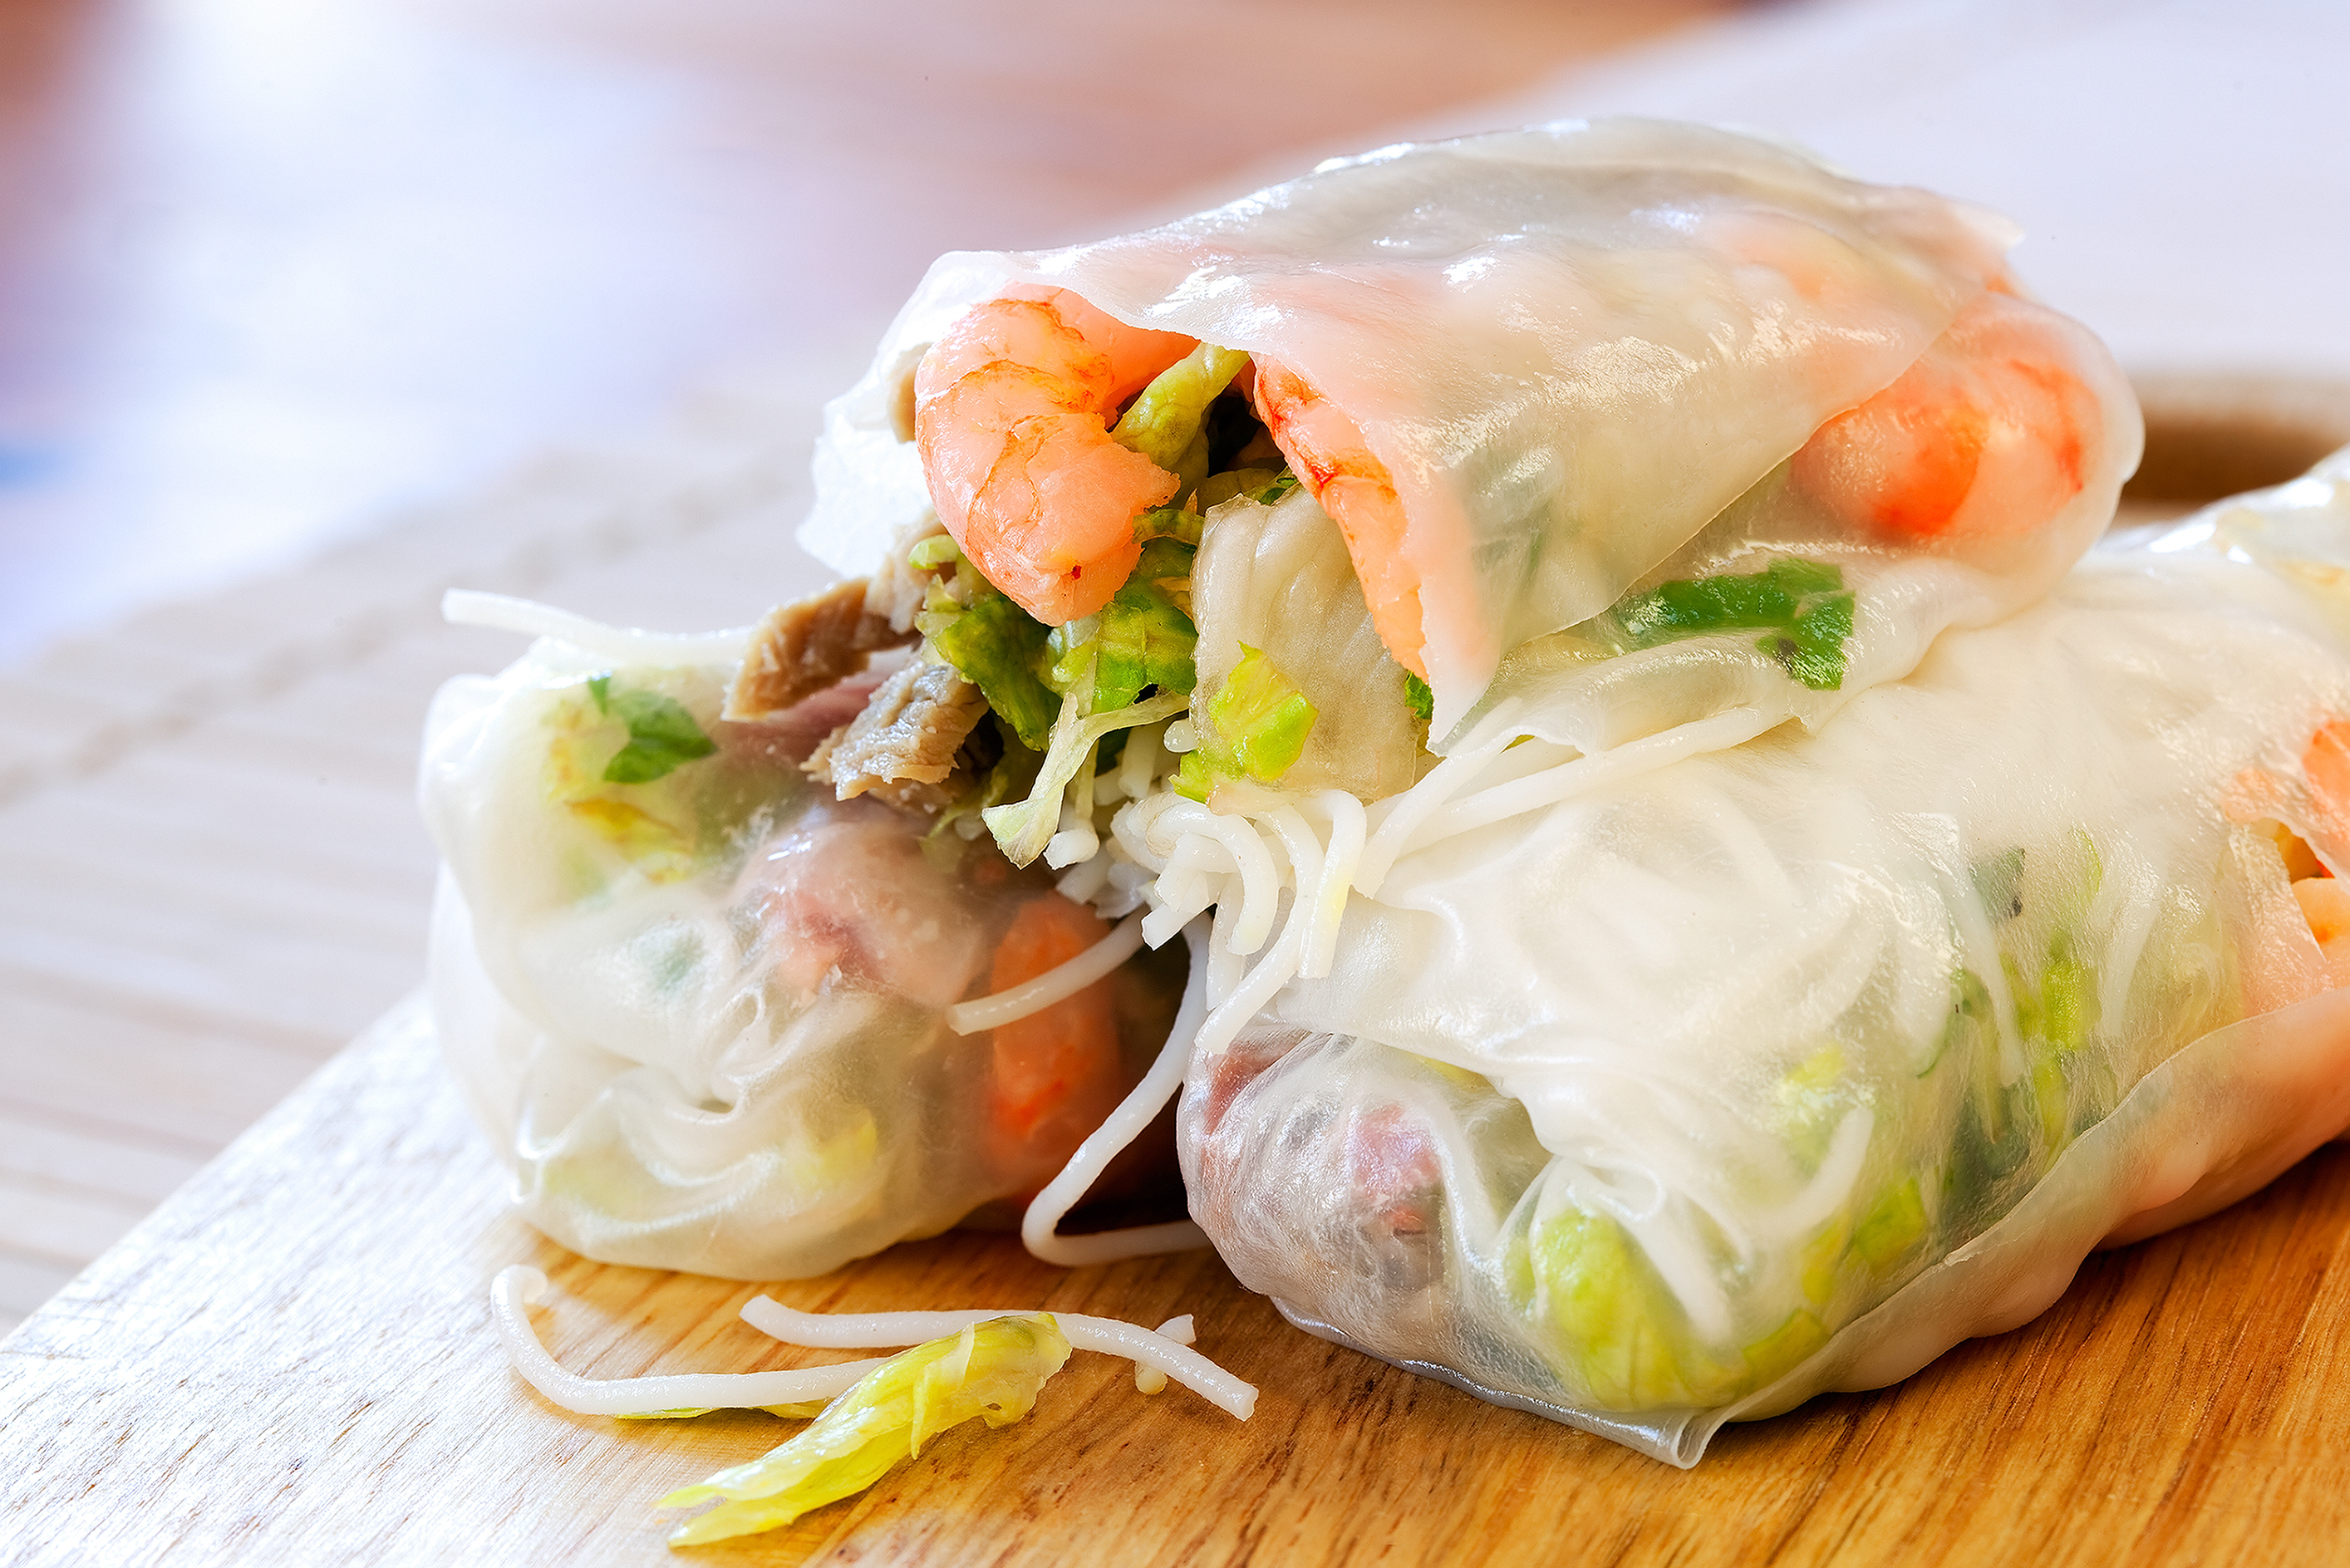 Three Vietnamese spring rolls on a board containing shrimp, vermicelli noodles, lettuce, and herbs.